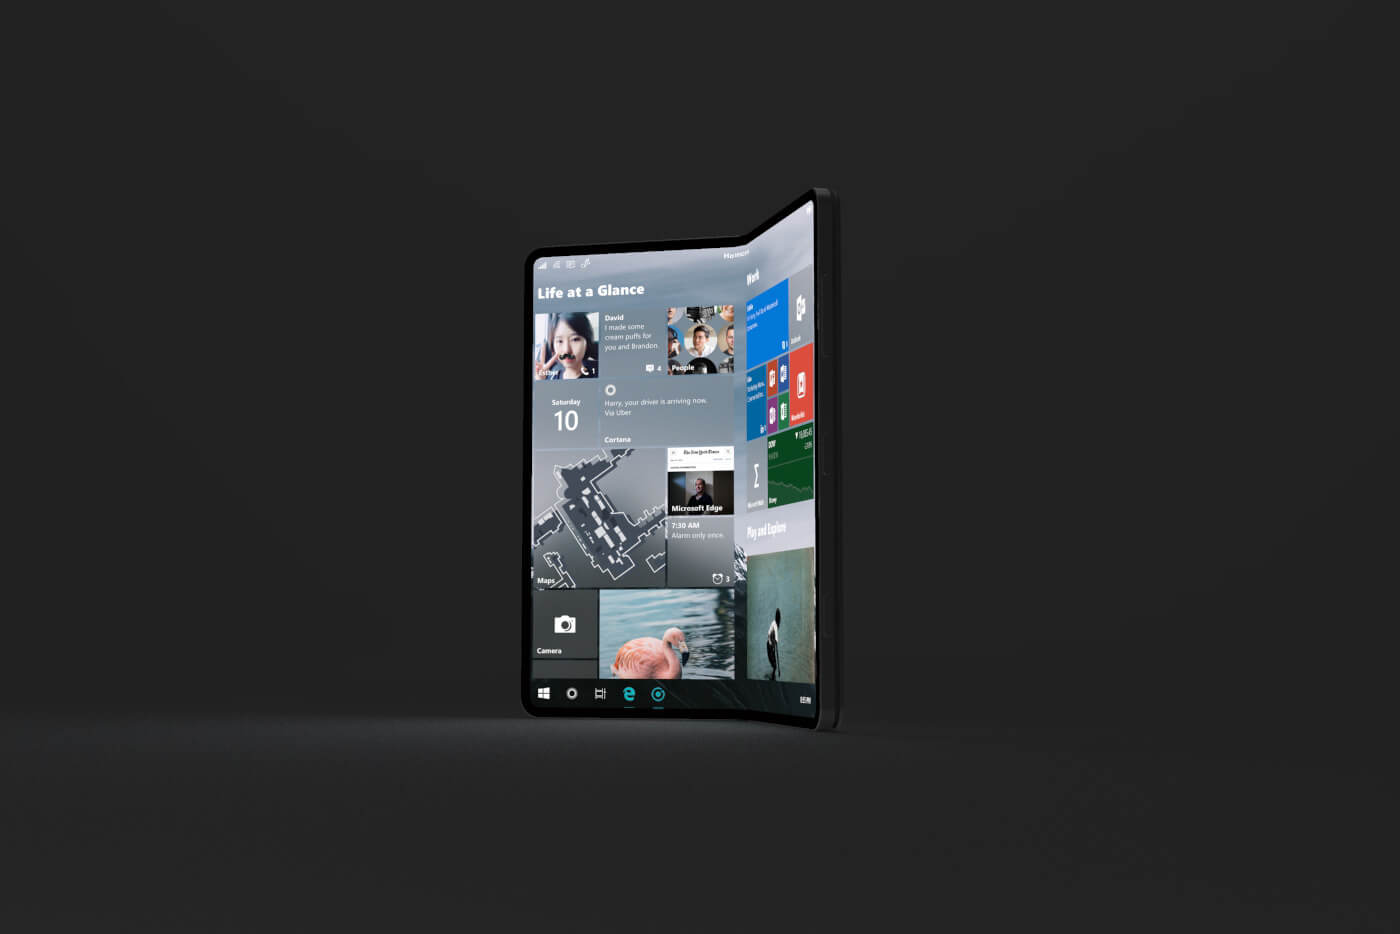 Windows 10 for Foldable Devices